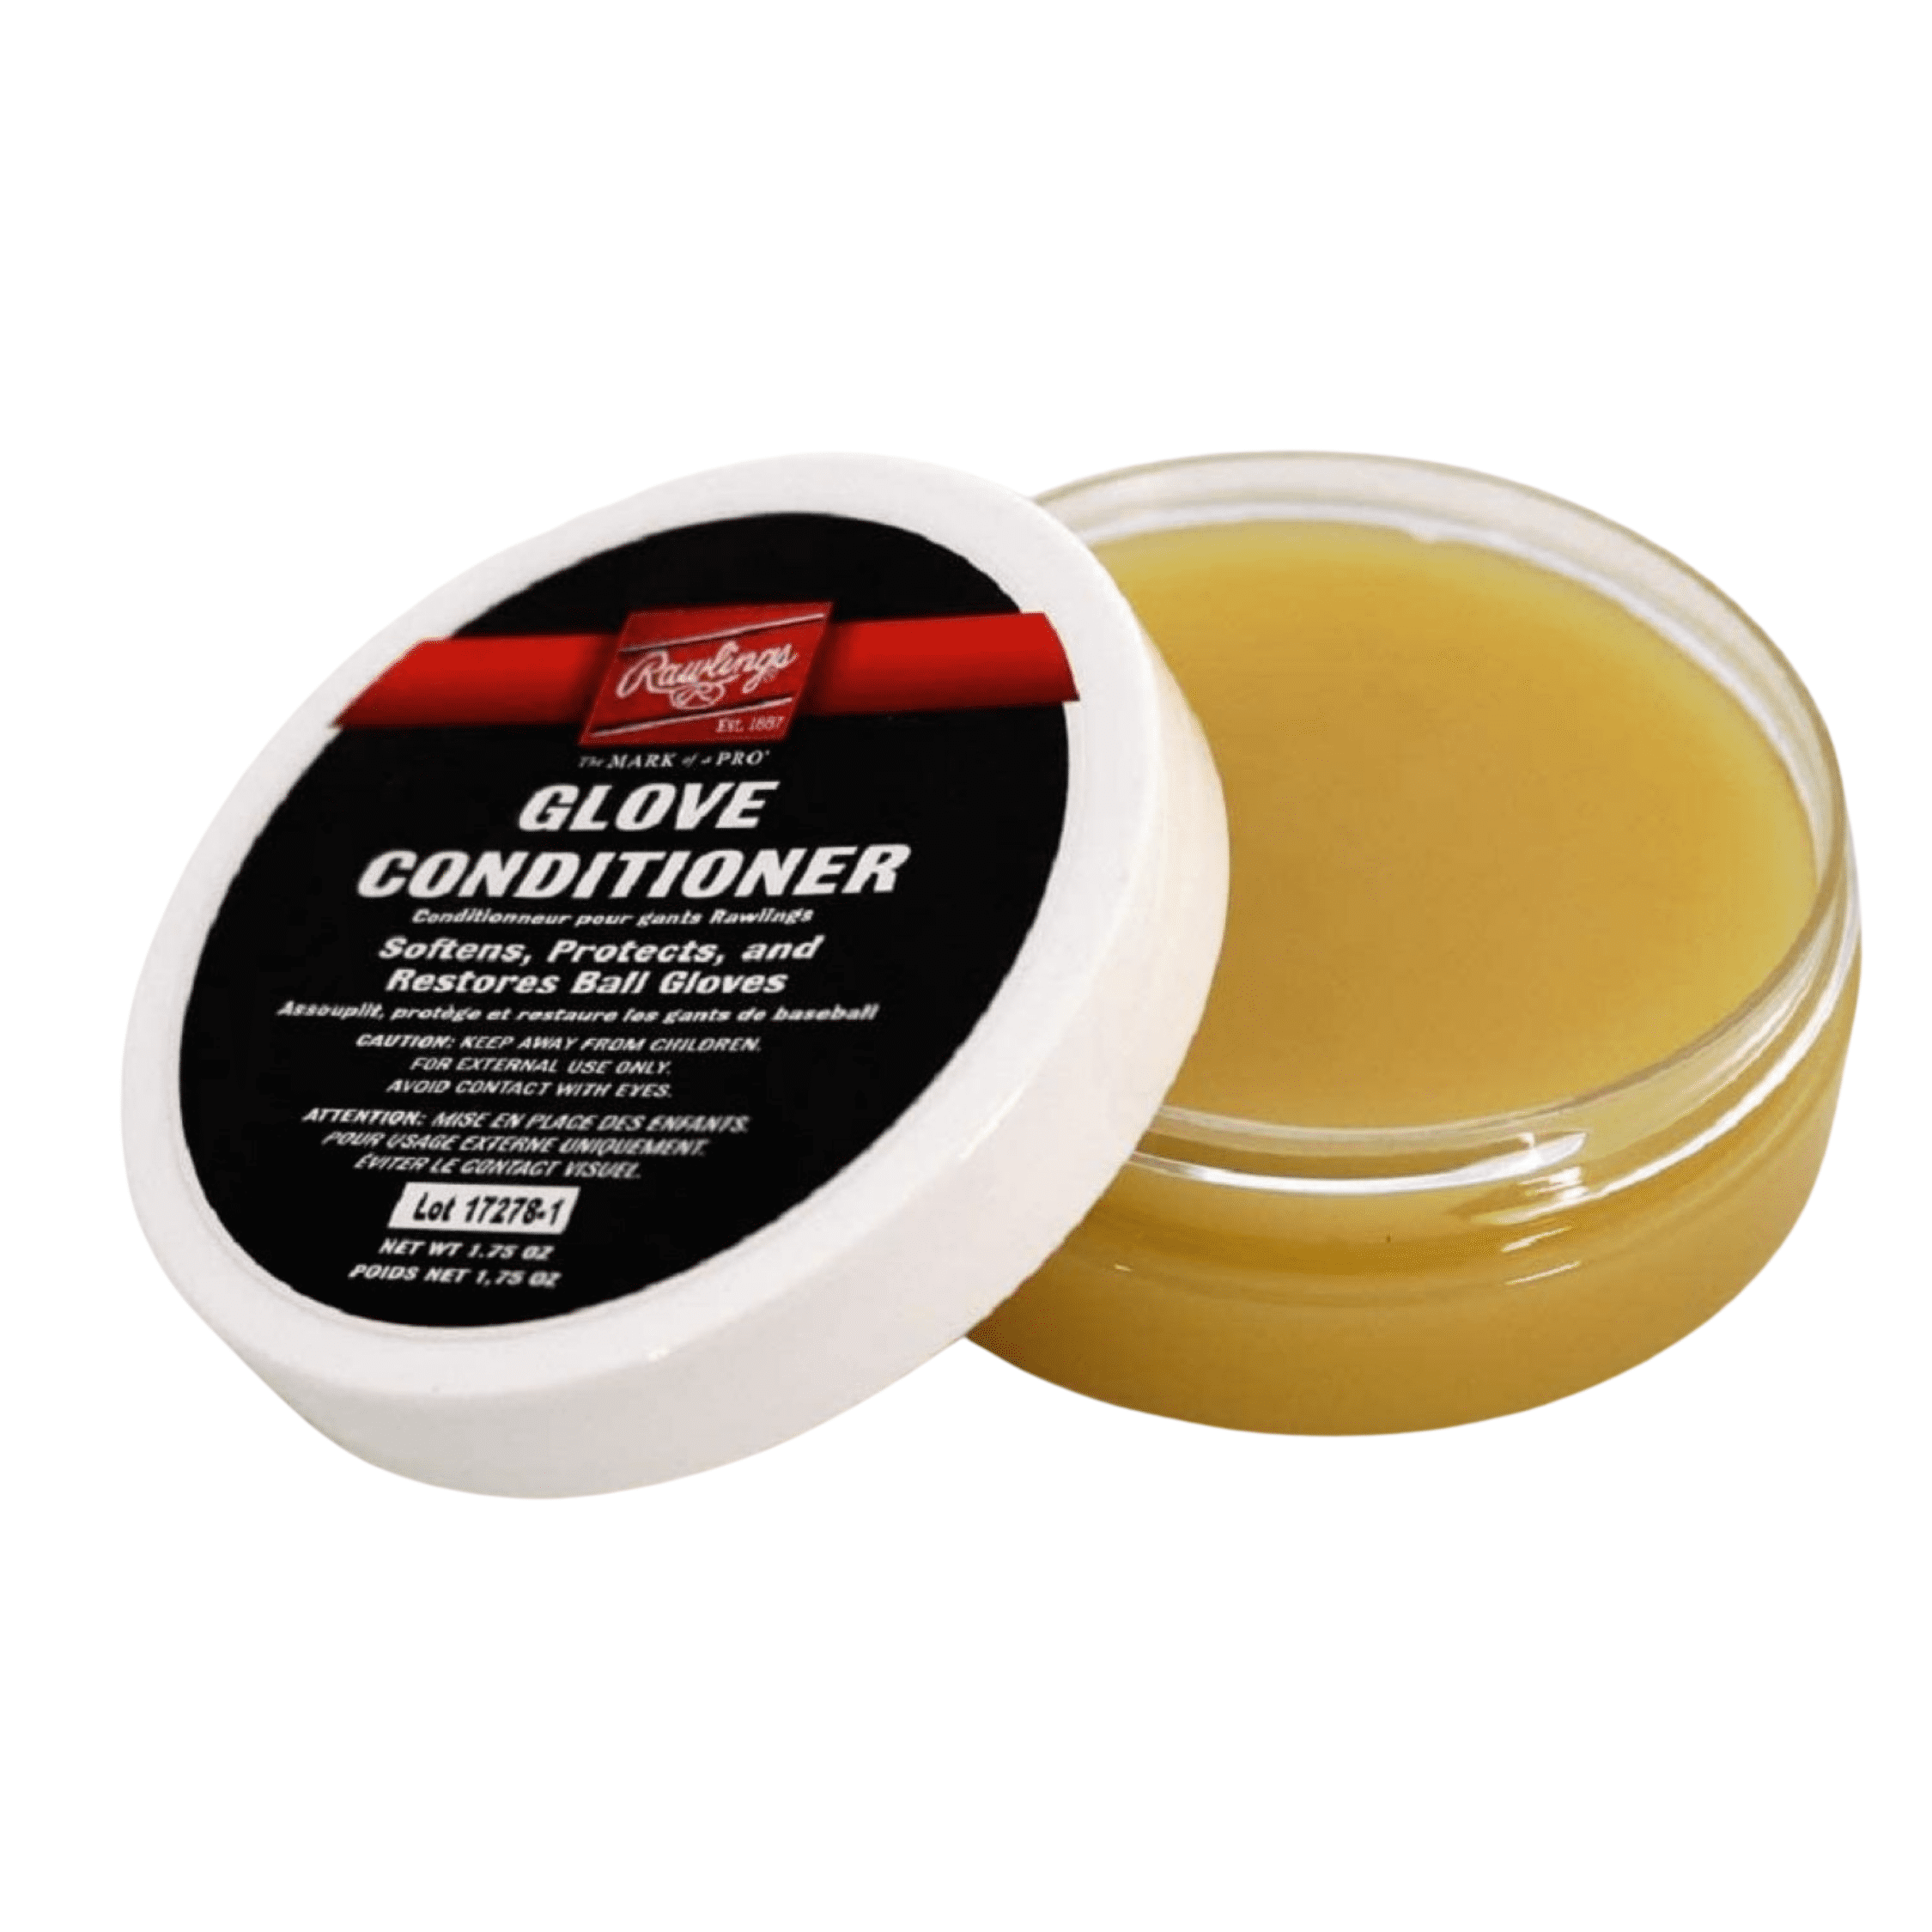 Hot Glove Cream Conditioner for Glove Care and Maintenance 2 oz 